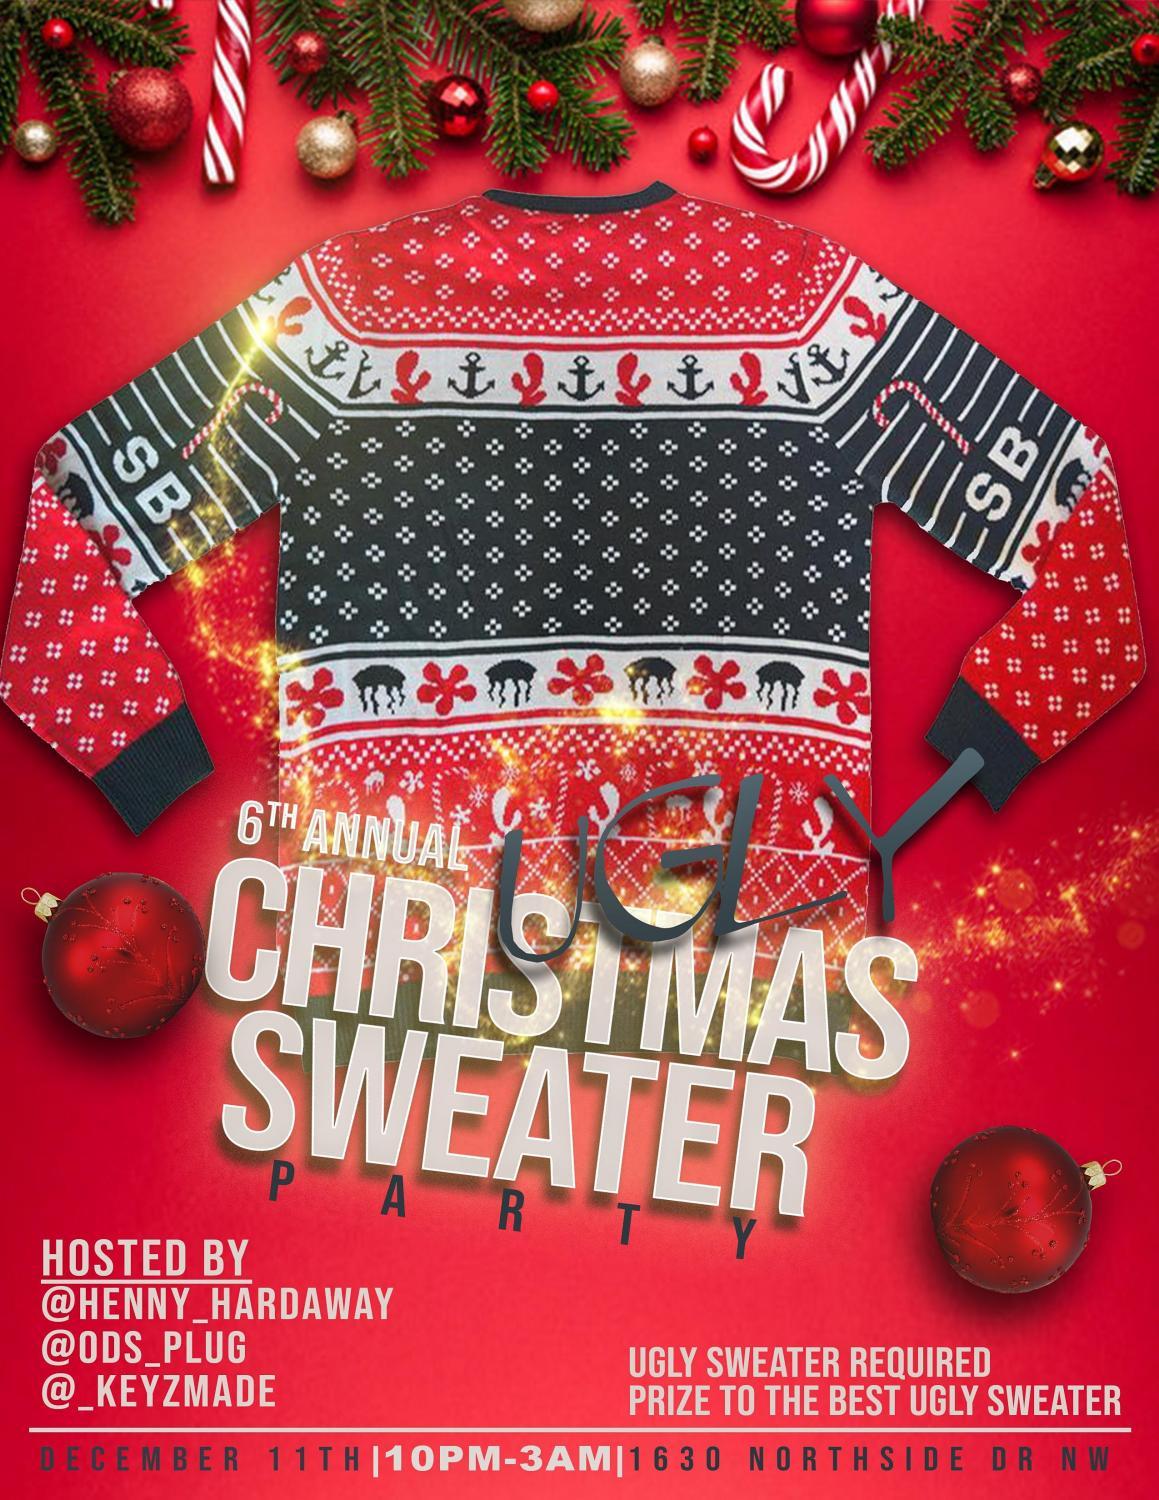 6th Annual Ugly Christmas Sweater Party!